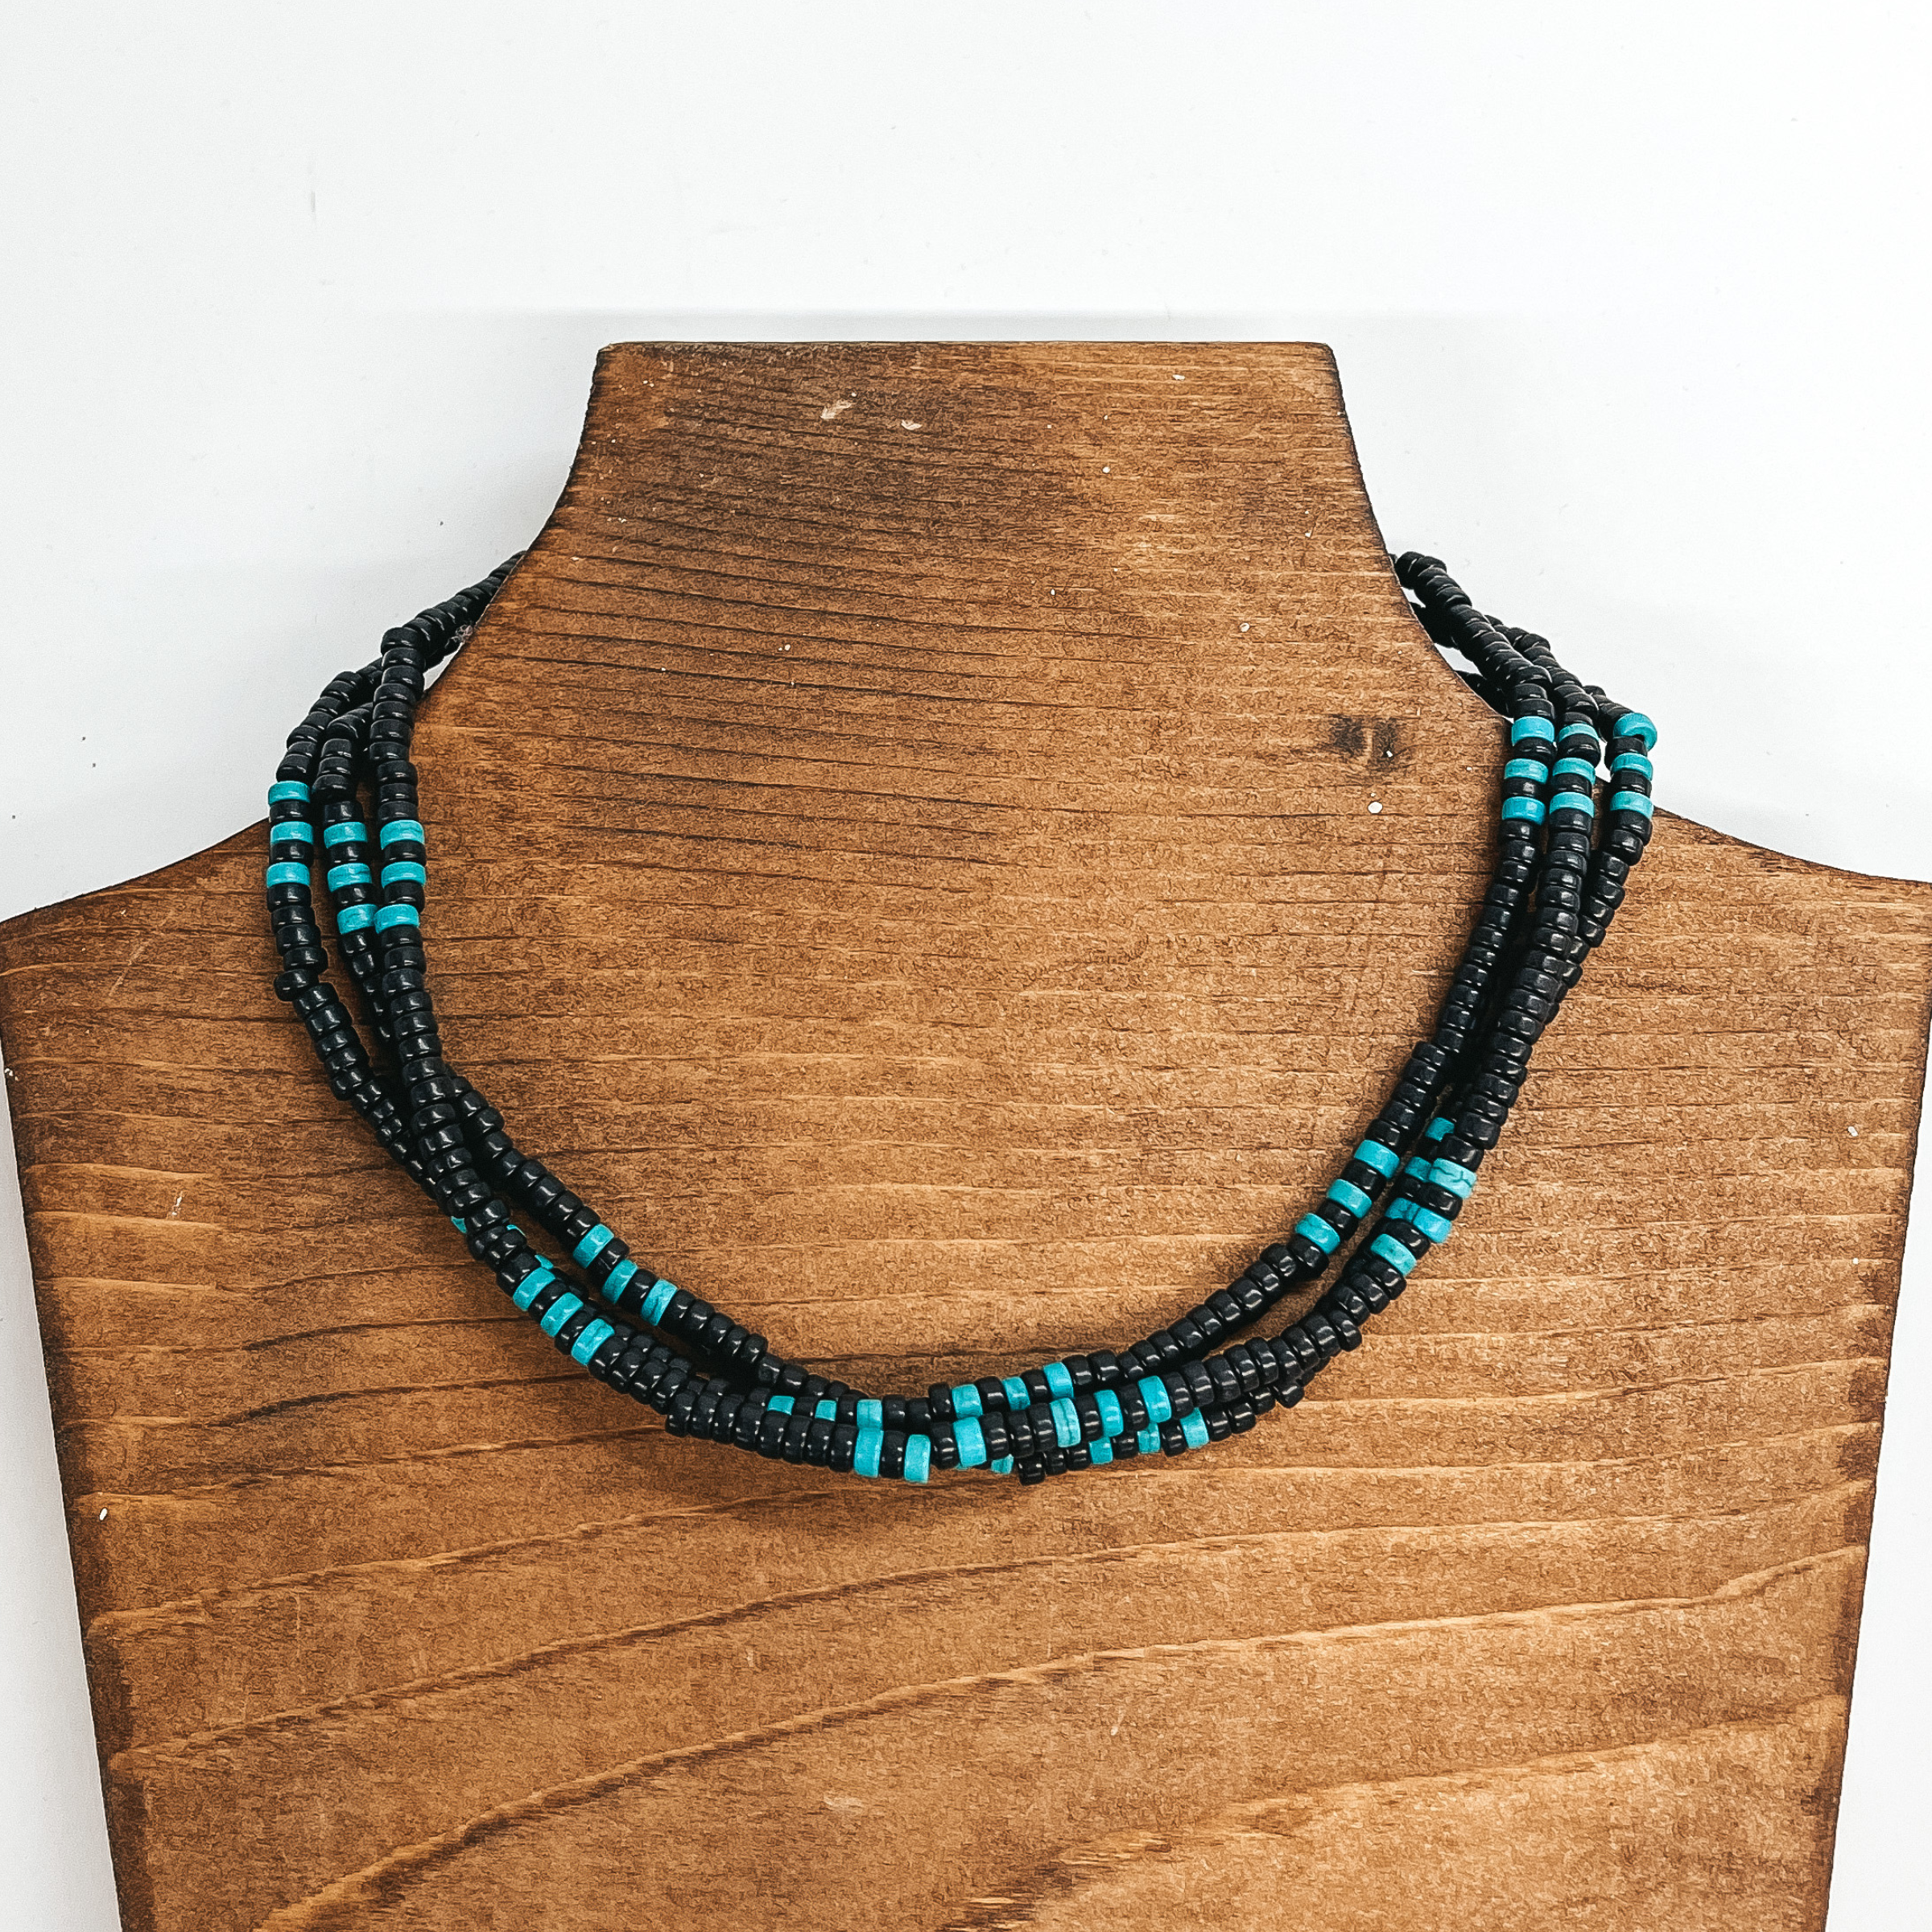 Trend Maker Three Strand Black Beaded Choker Necklace with Turquoise Beads - Giddy Up Glamour Boutique